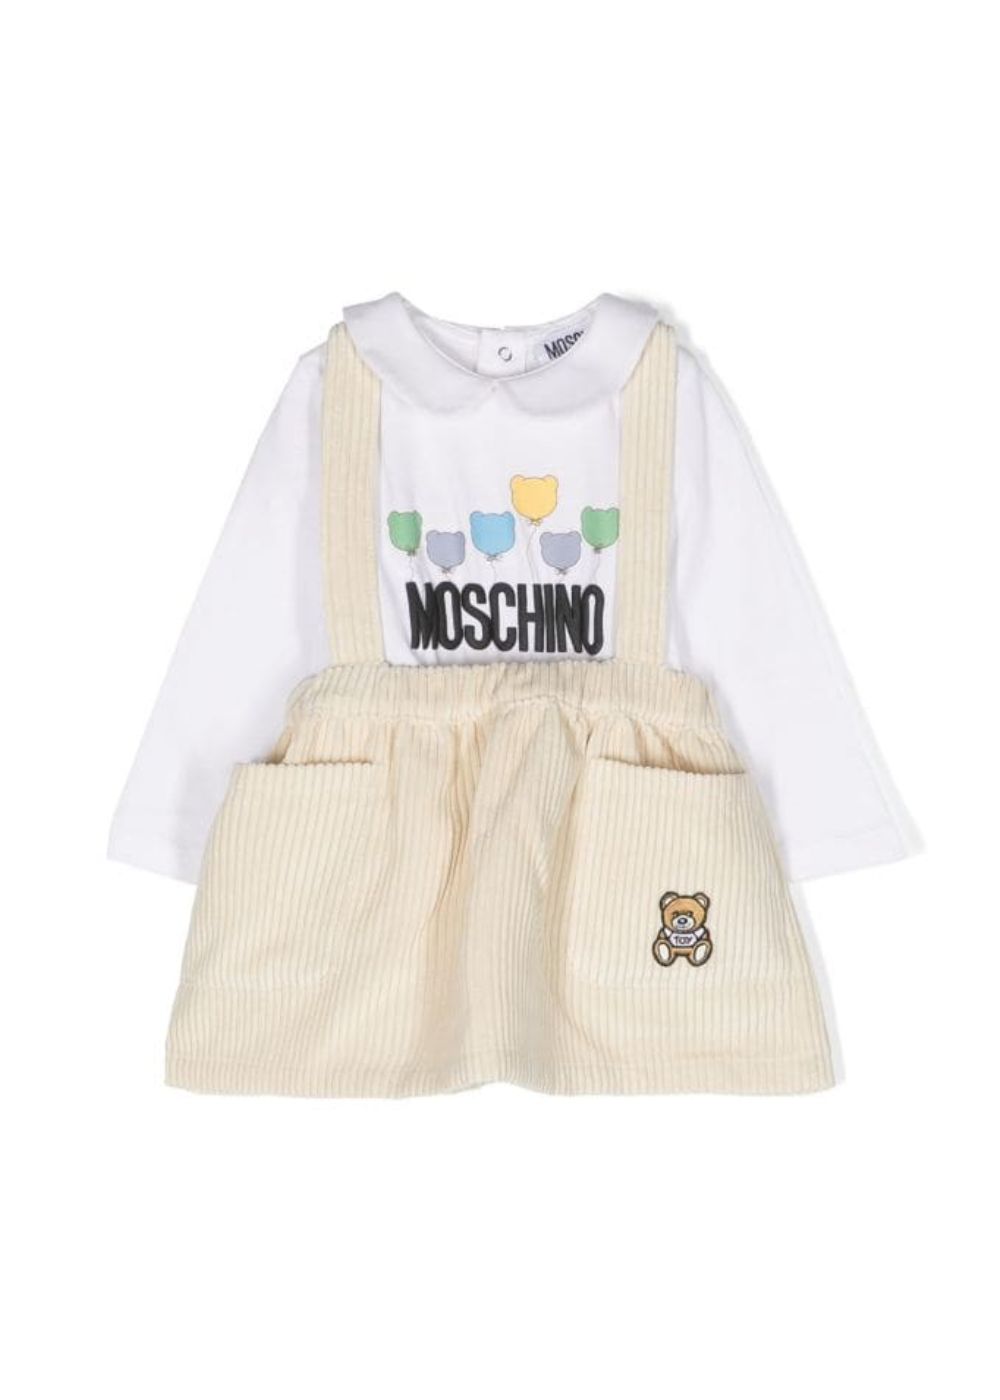 Featured image for “Moschino Completo 2 pezzi”